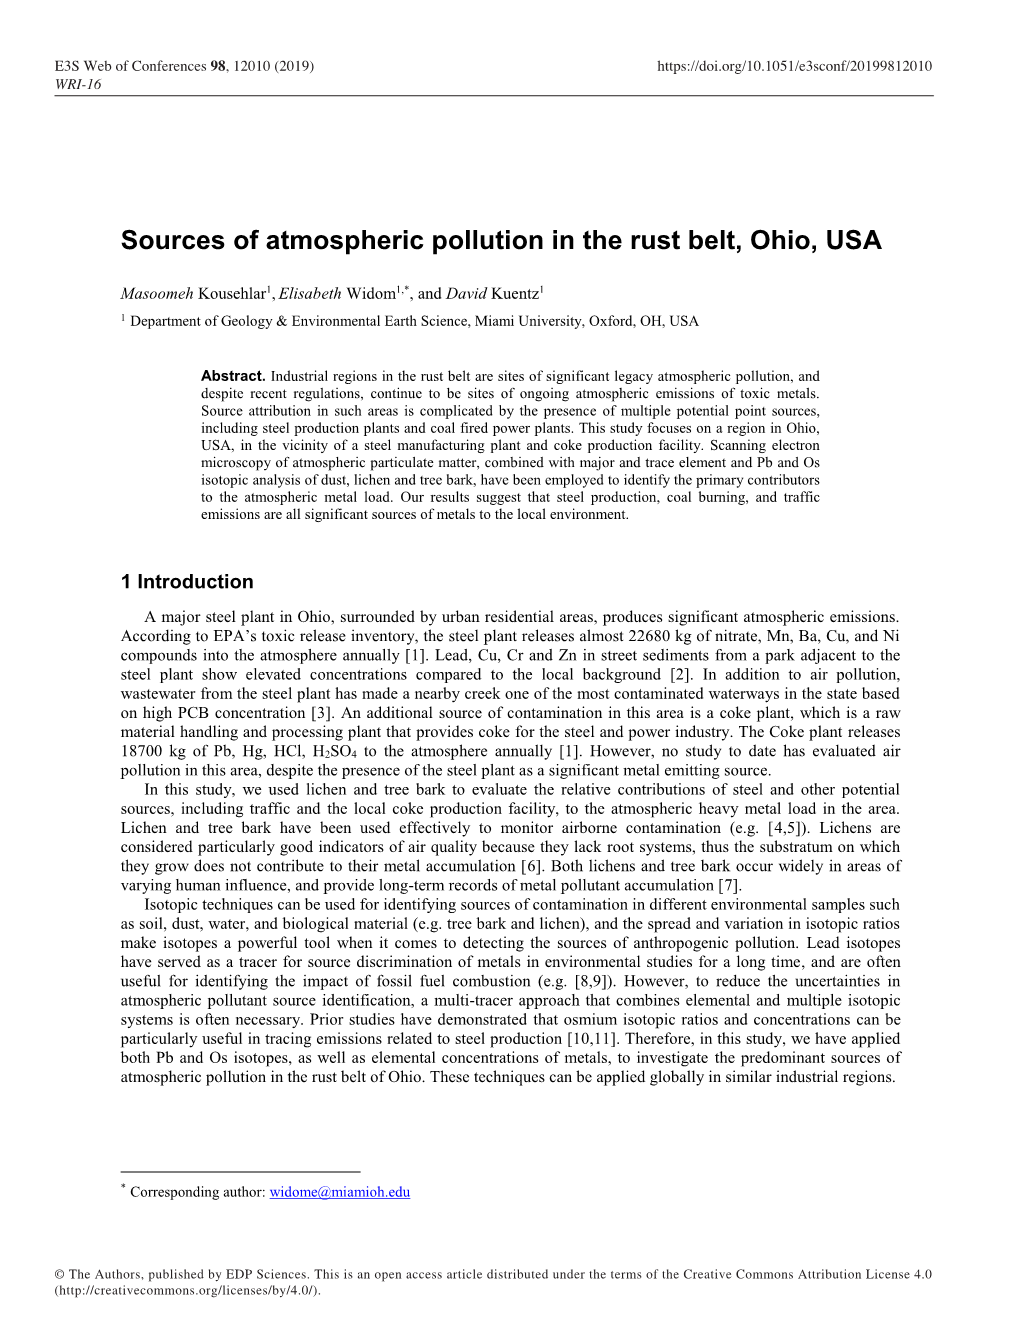 Sources of Atmospheric Pollution in the Rust Belt, Ohio, USA